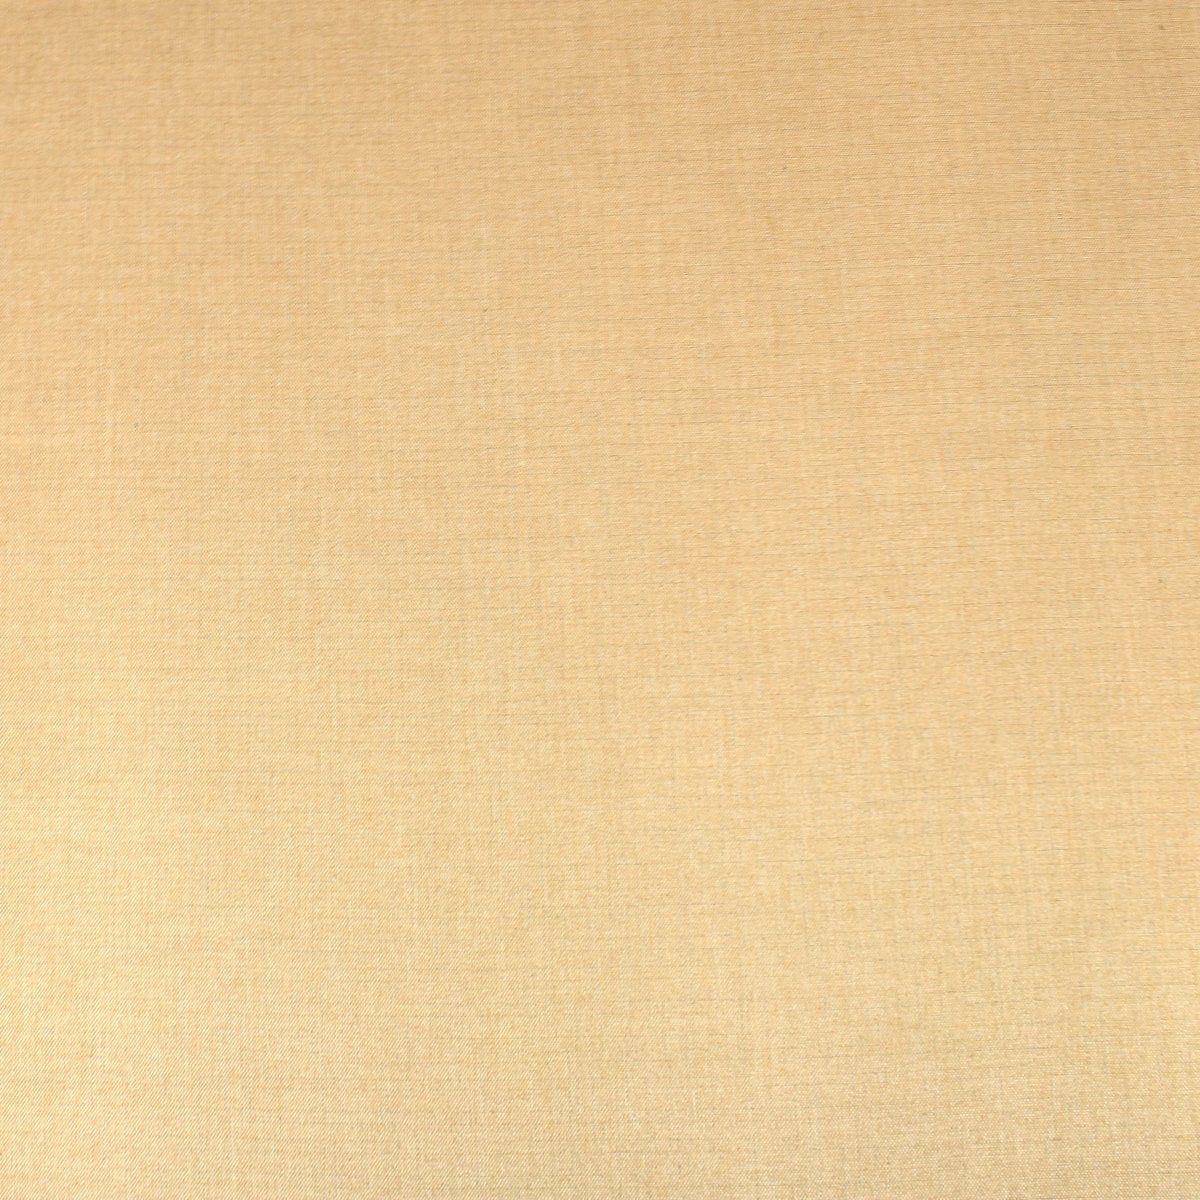 3 Metres Premium Quality Viscose Blend Suiting Fabric 55" Wide Golden Beige - Pound A Metre